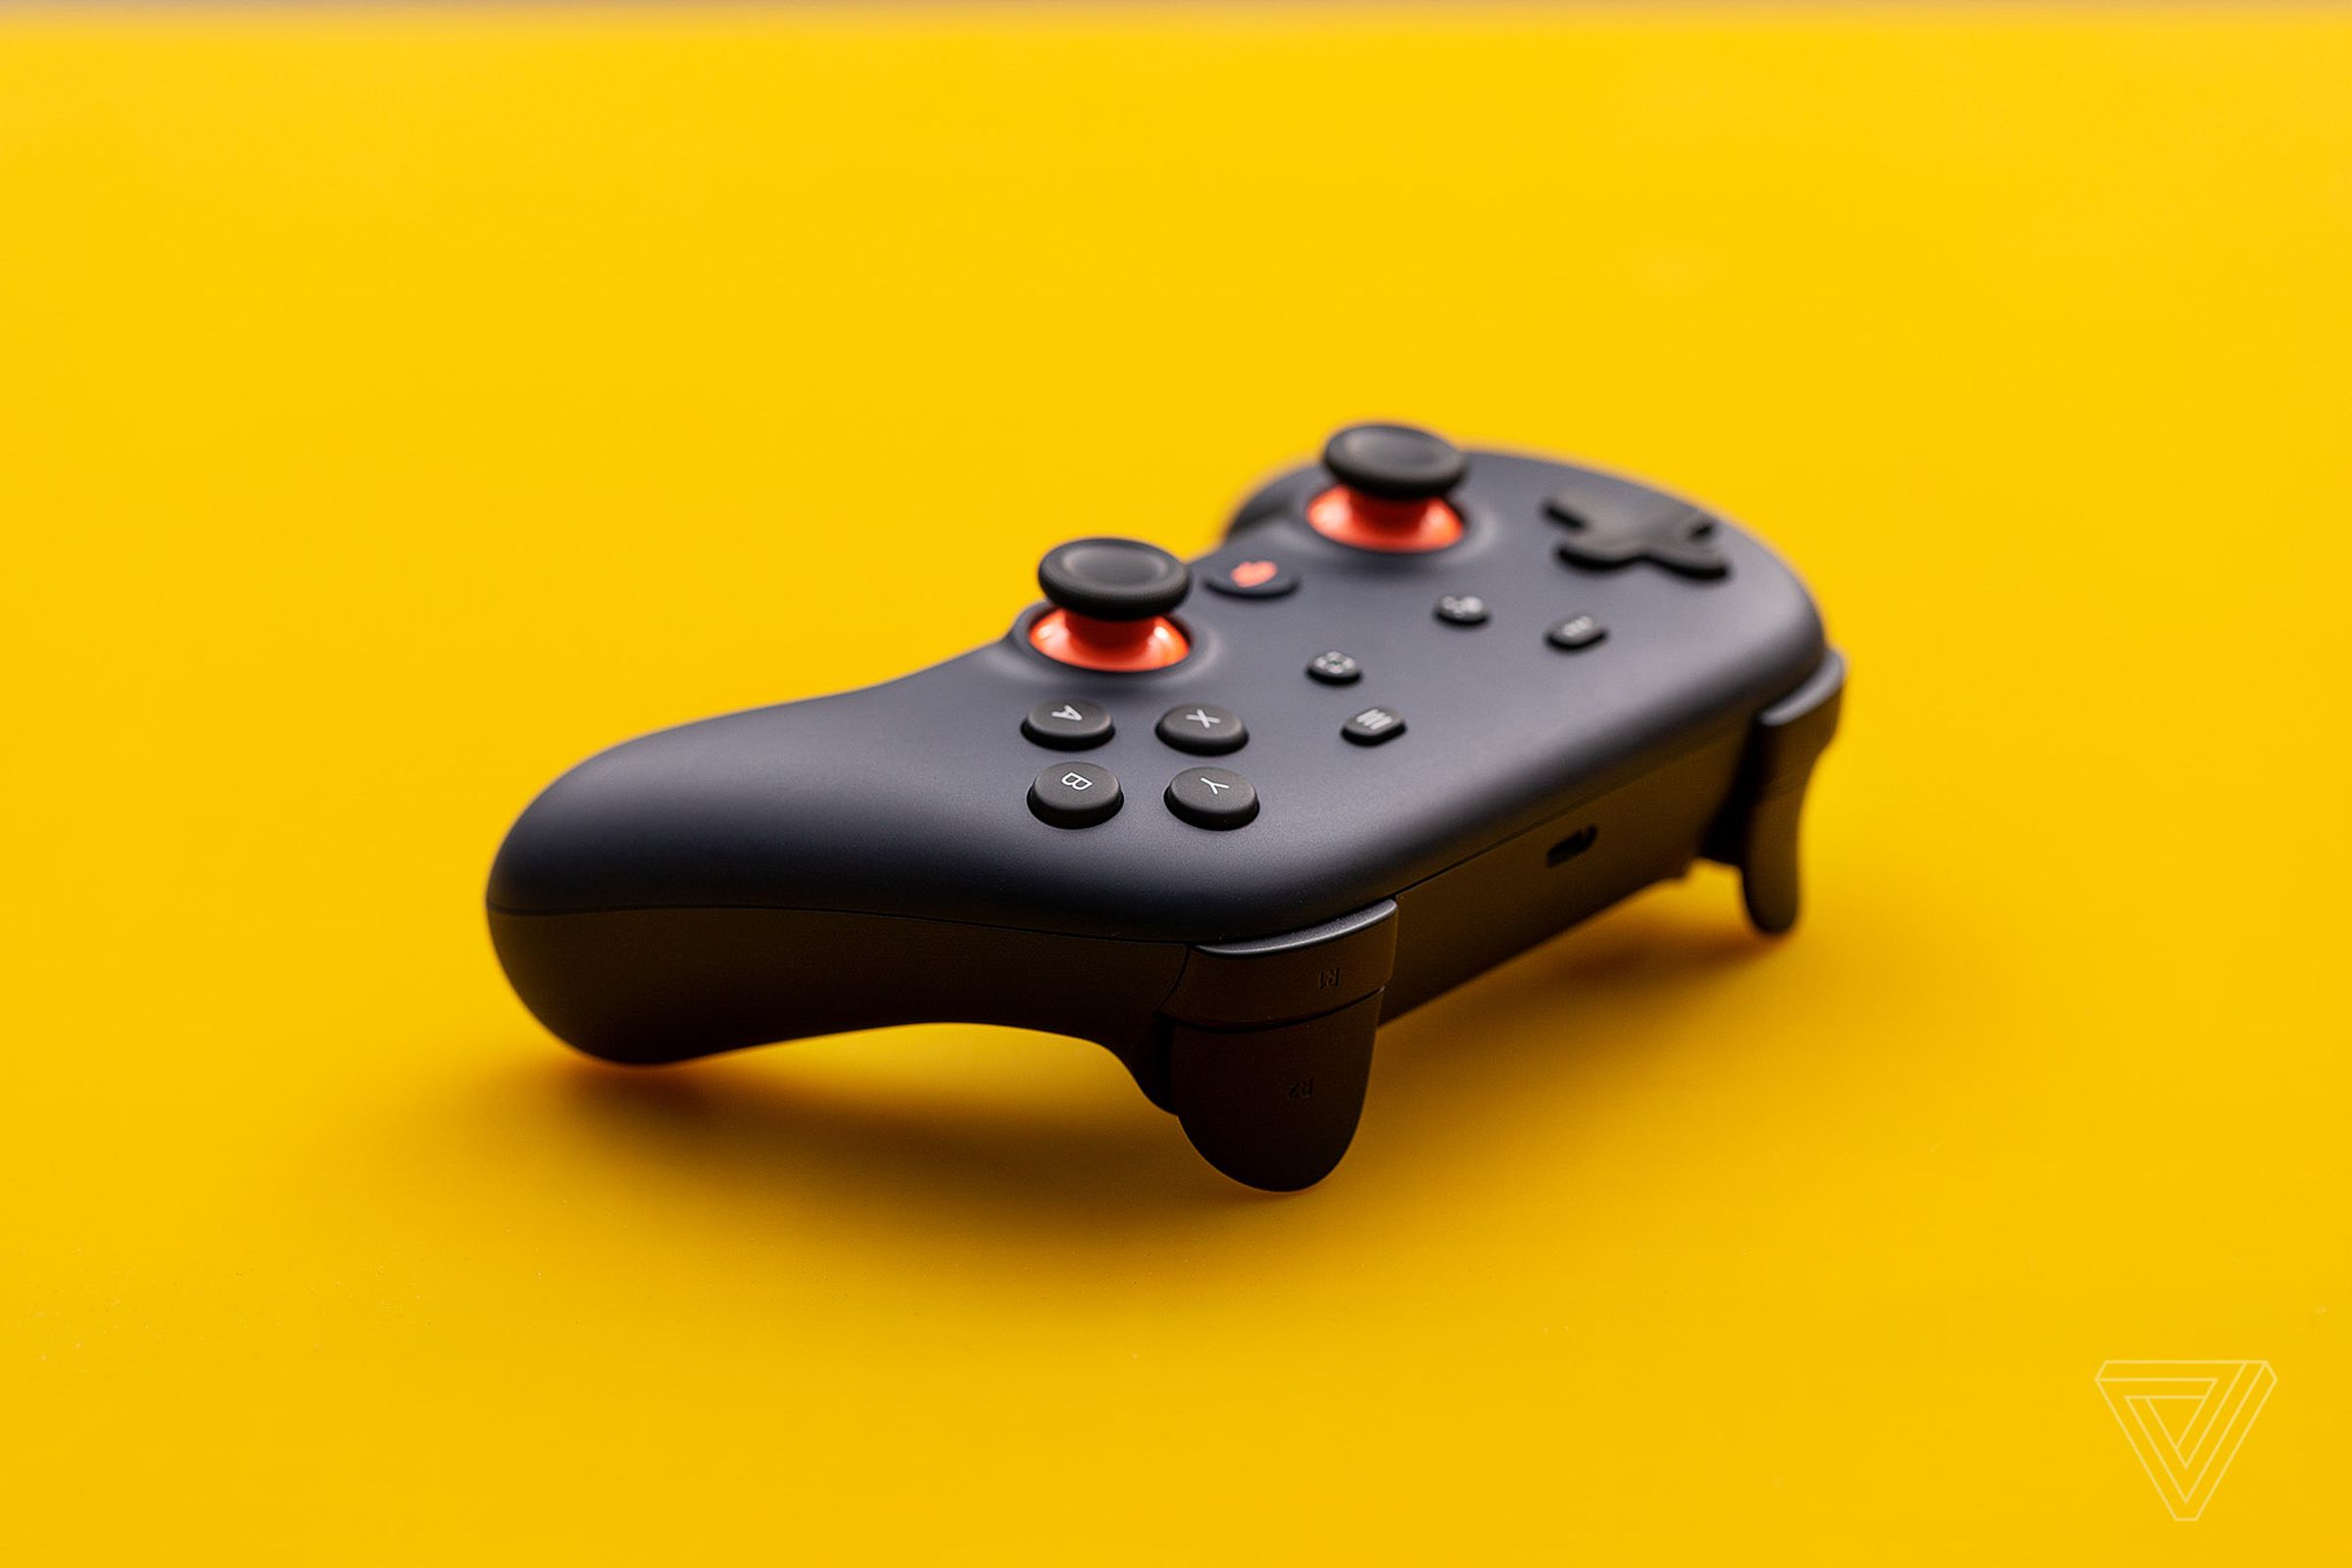 Google Stadia is survived by its gamepad, fans, and its Nvidia and Amazon rivals.